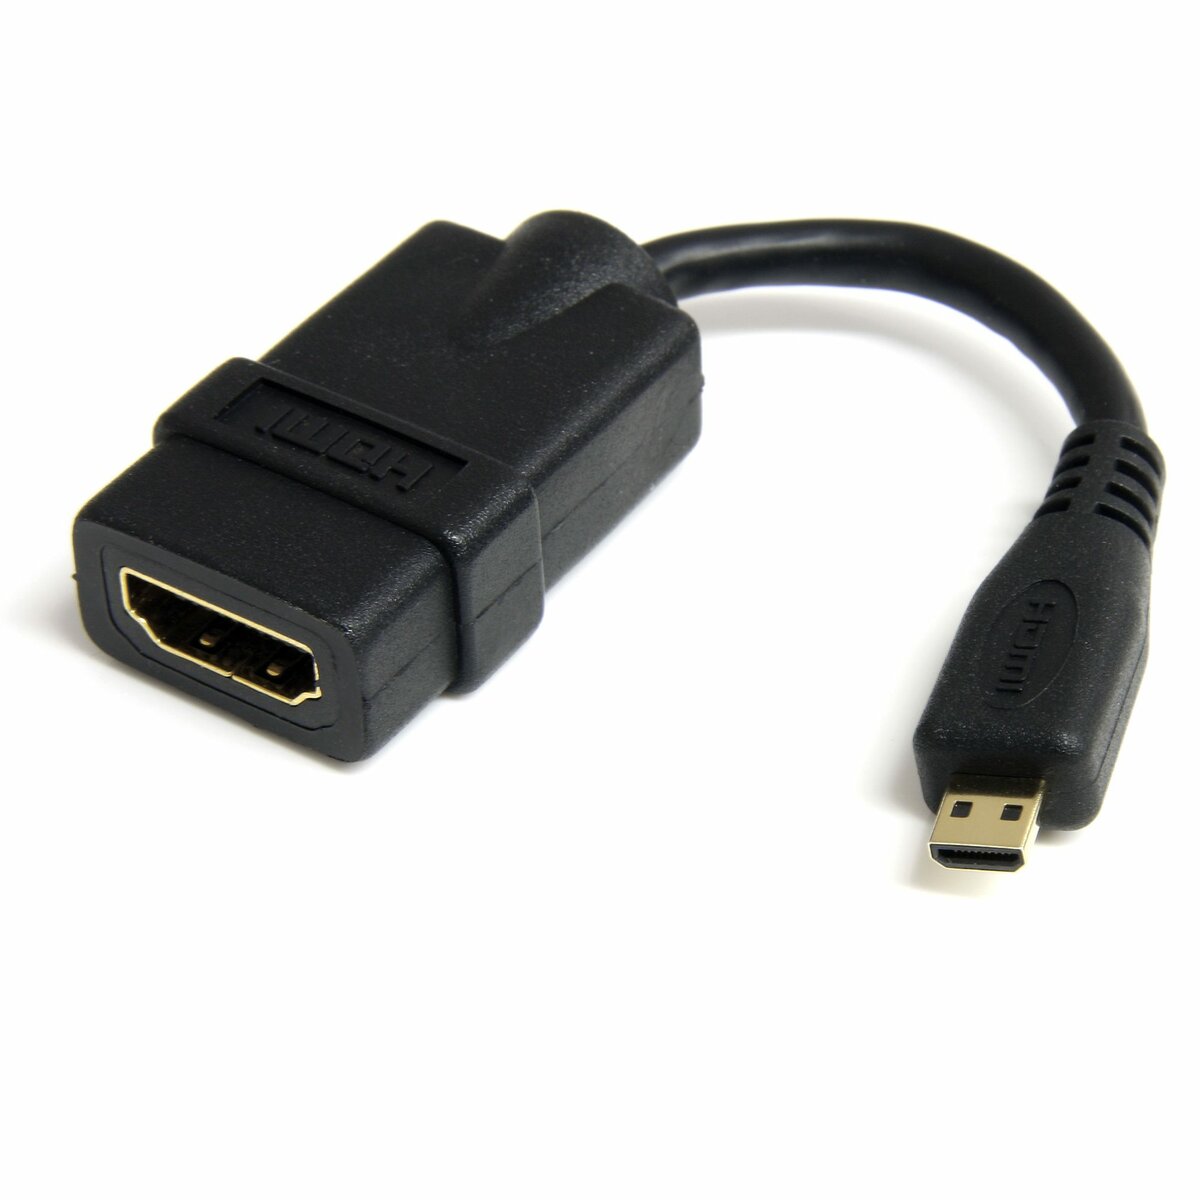 Product  StarTech.com 5in High Speed HDMI Adapter Cable - HDMI to HDMI  Micro - F/M - 5 inch Micro HDMI Adapter - HDMI Female to Micro HDMI Male  (HDADFM5IN) - HDMI adapter - 1.2 cm